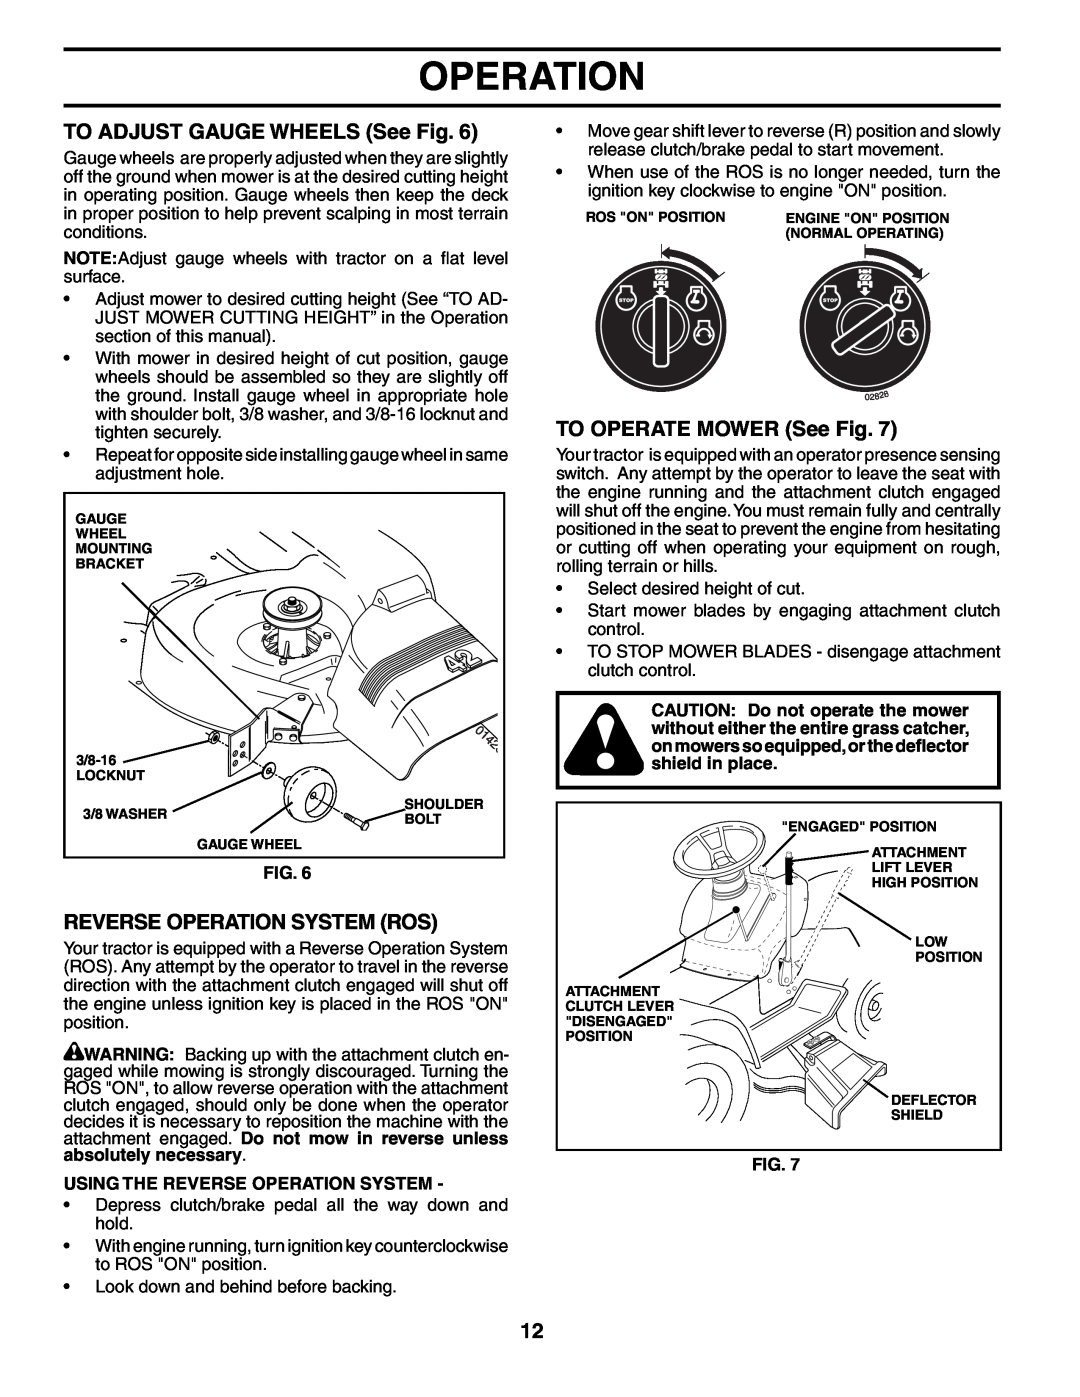 Poulan 96012004600, 401115 manual TO ADJUST GAUGE WHEELS See Fig, Reverse Operation System Ros, TO OPERATE MOWER See Fig 